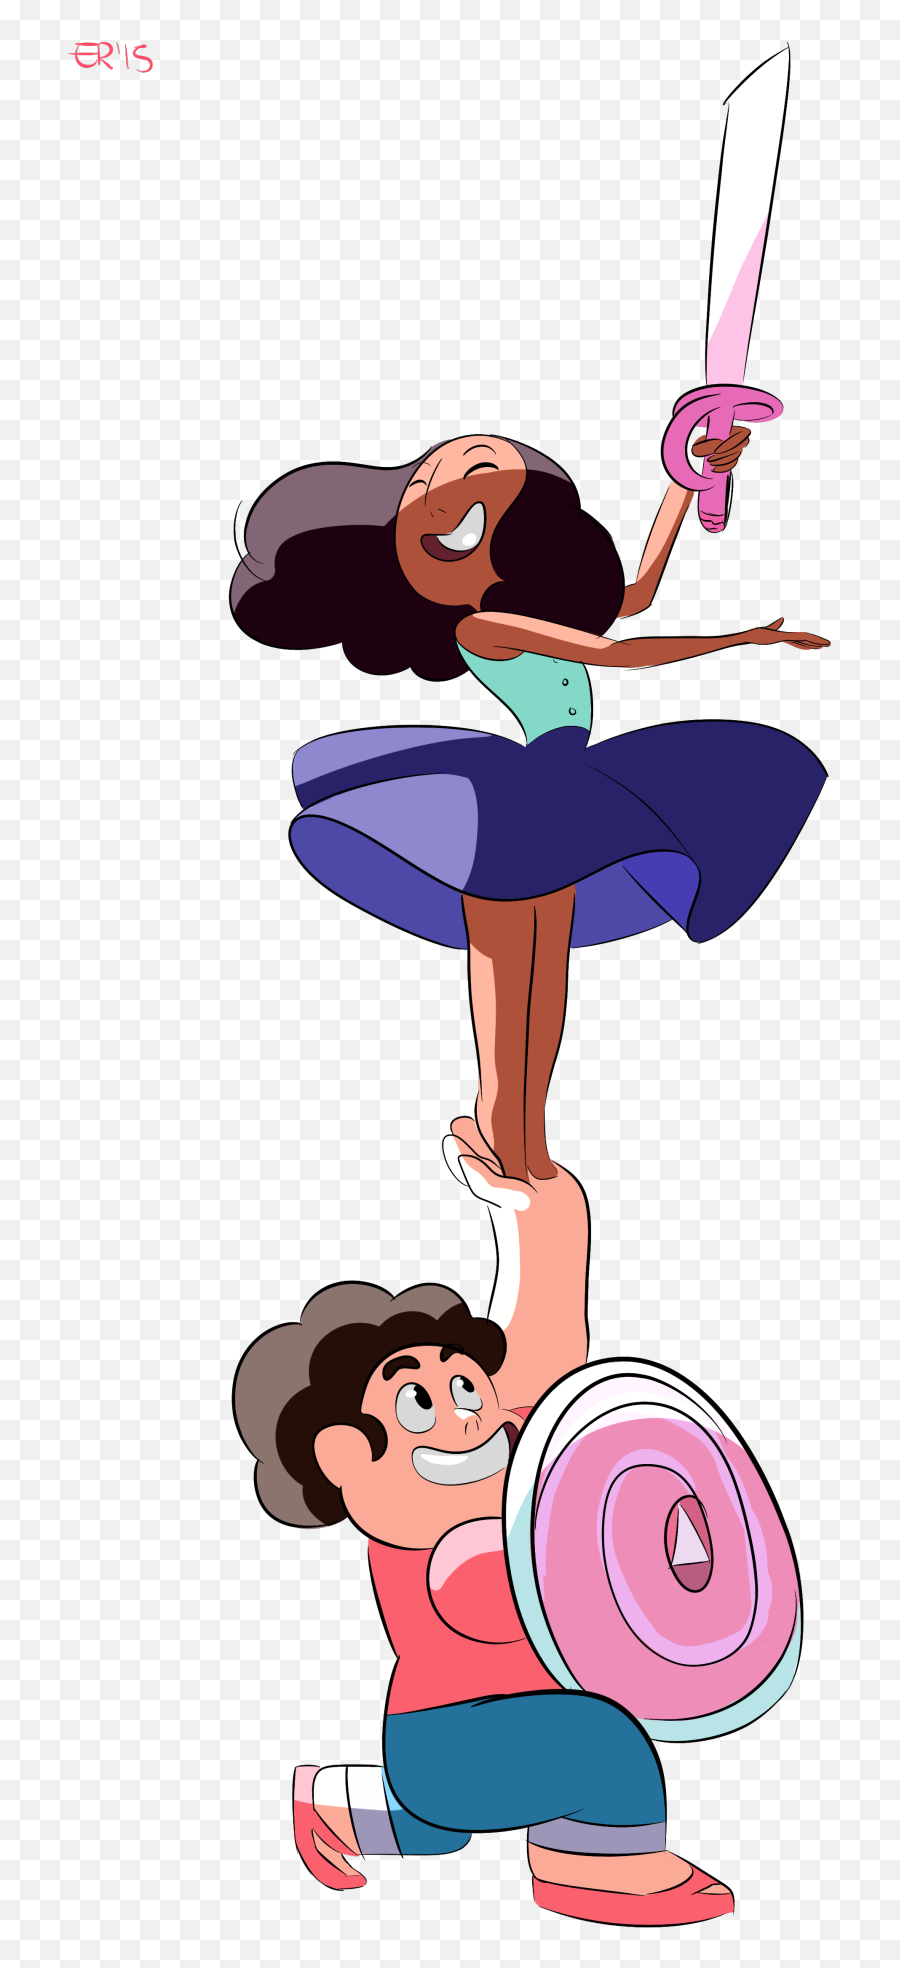 Best Friends - Steven Universe Steven And Connie Cute Emoji,Steven Universe Poof From Emotion